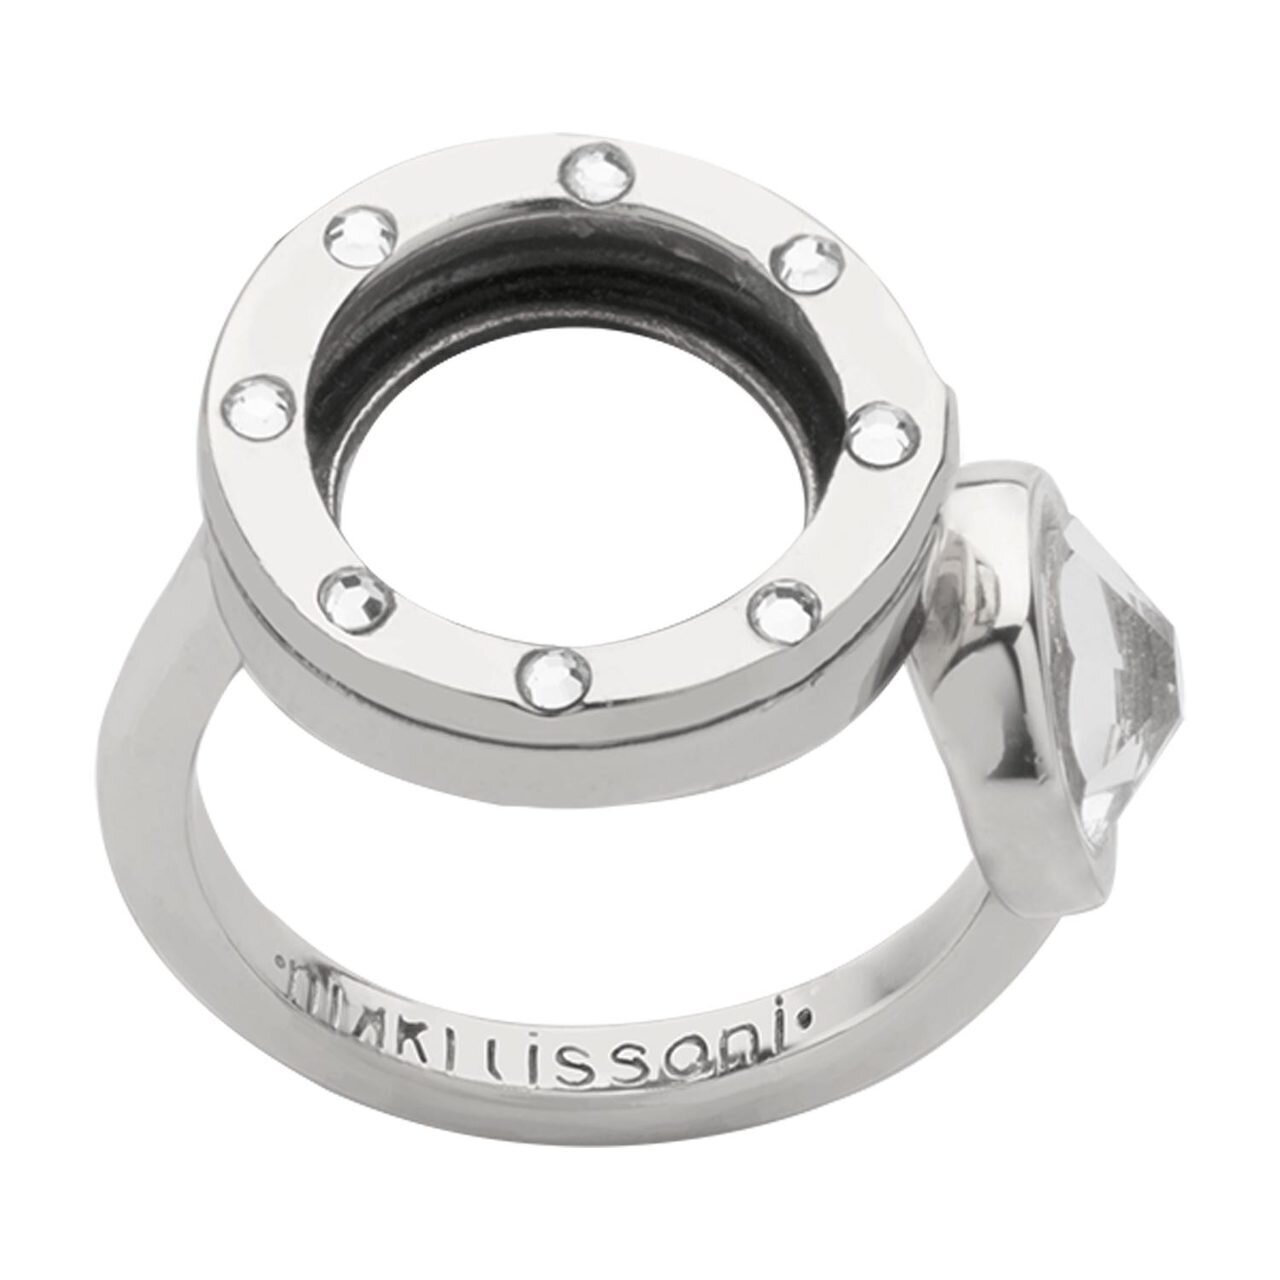 Nikki Lissoni Interchangeable Open Ring with Swarovski Stones Silver-plated Size 10 R1006S10